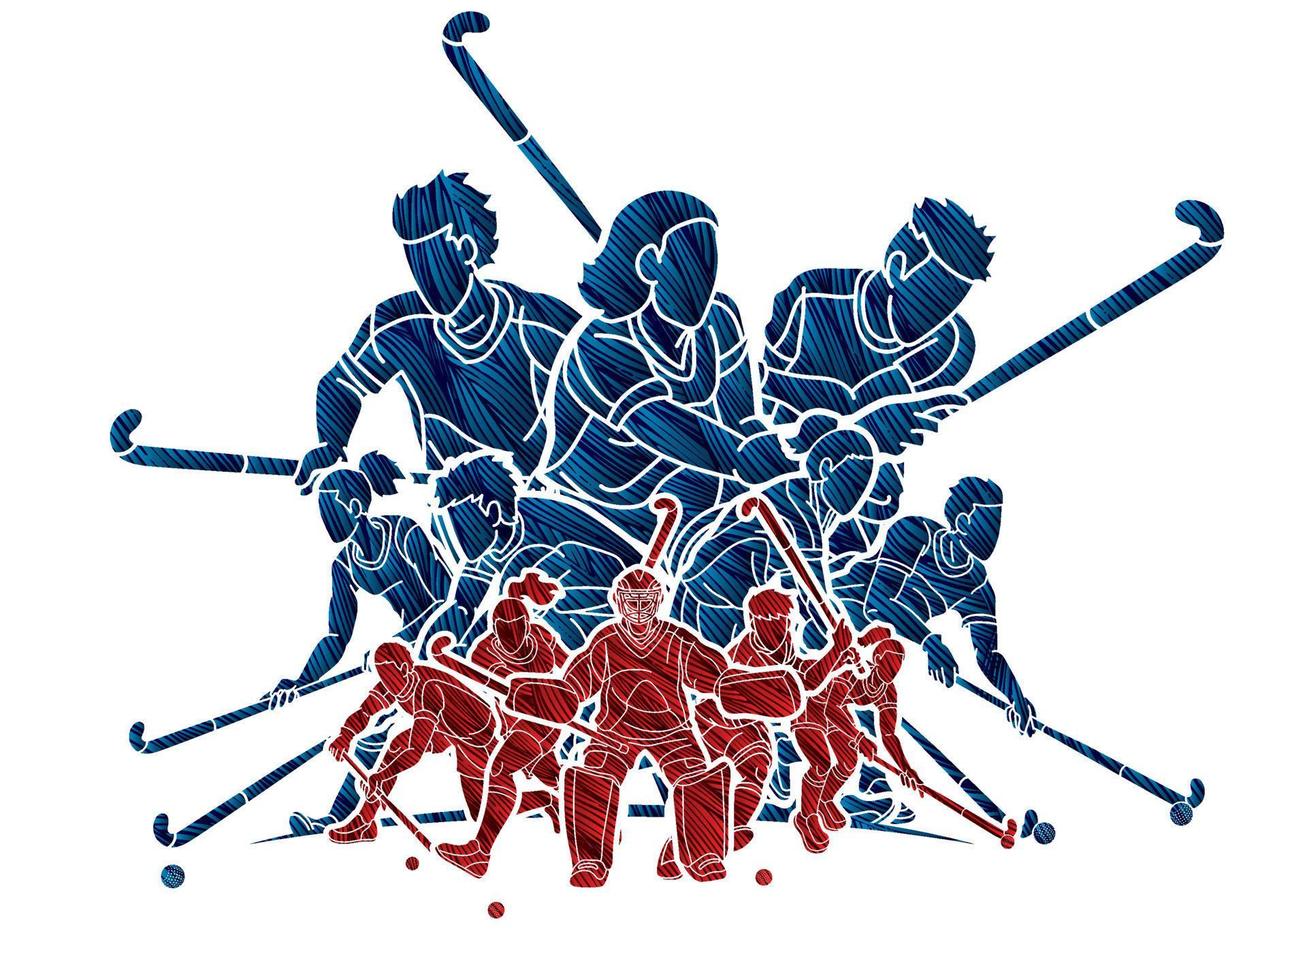 Field Hockey Sport Team Male and Female Players Action Together vector